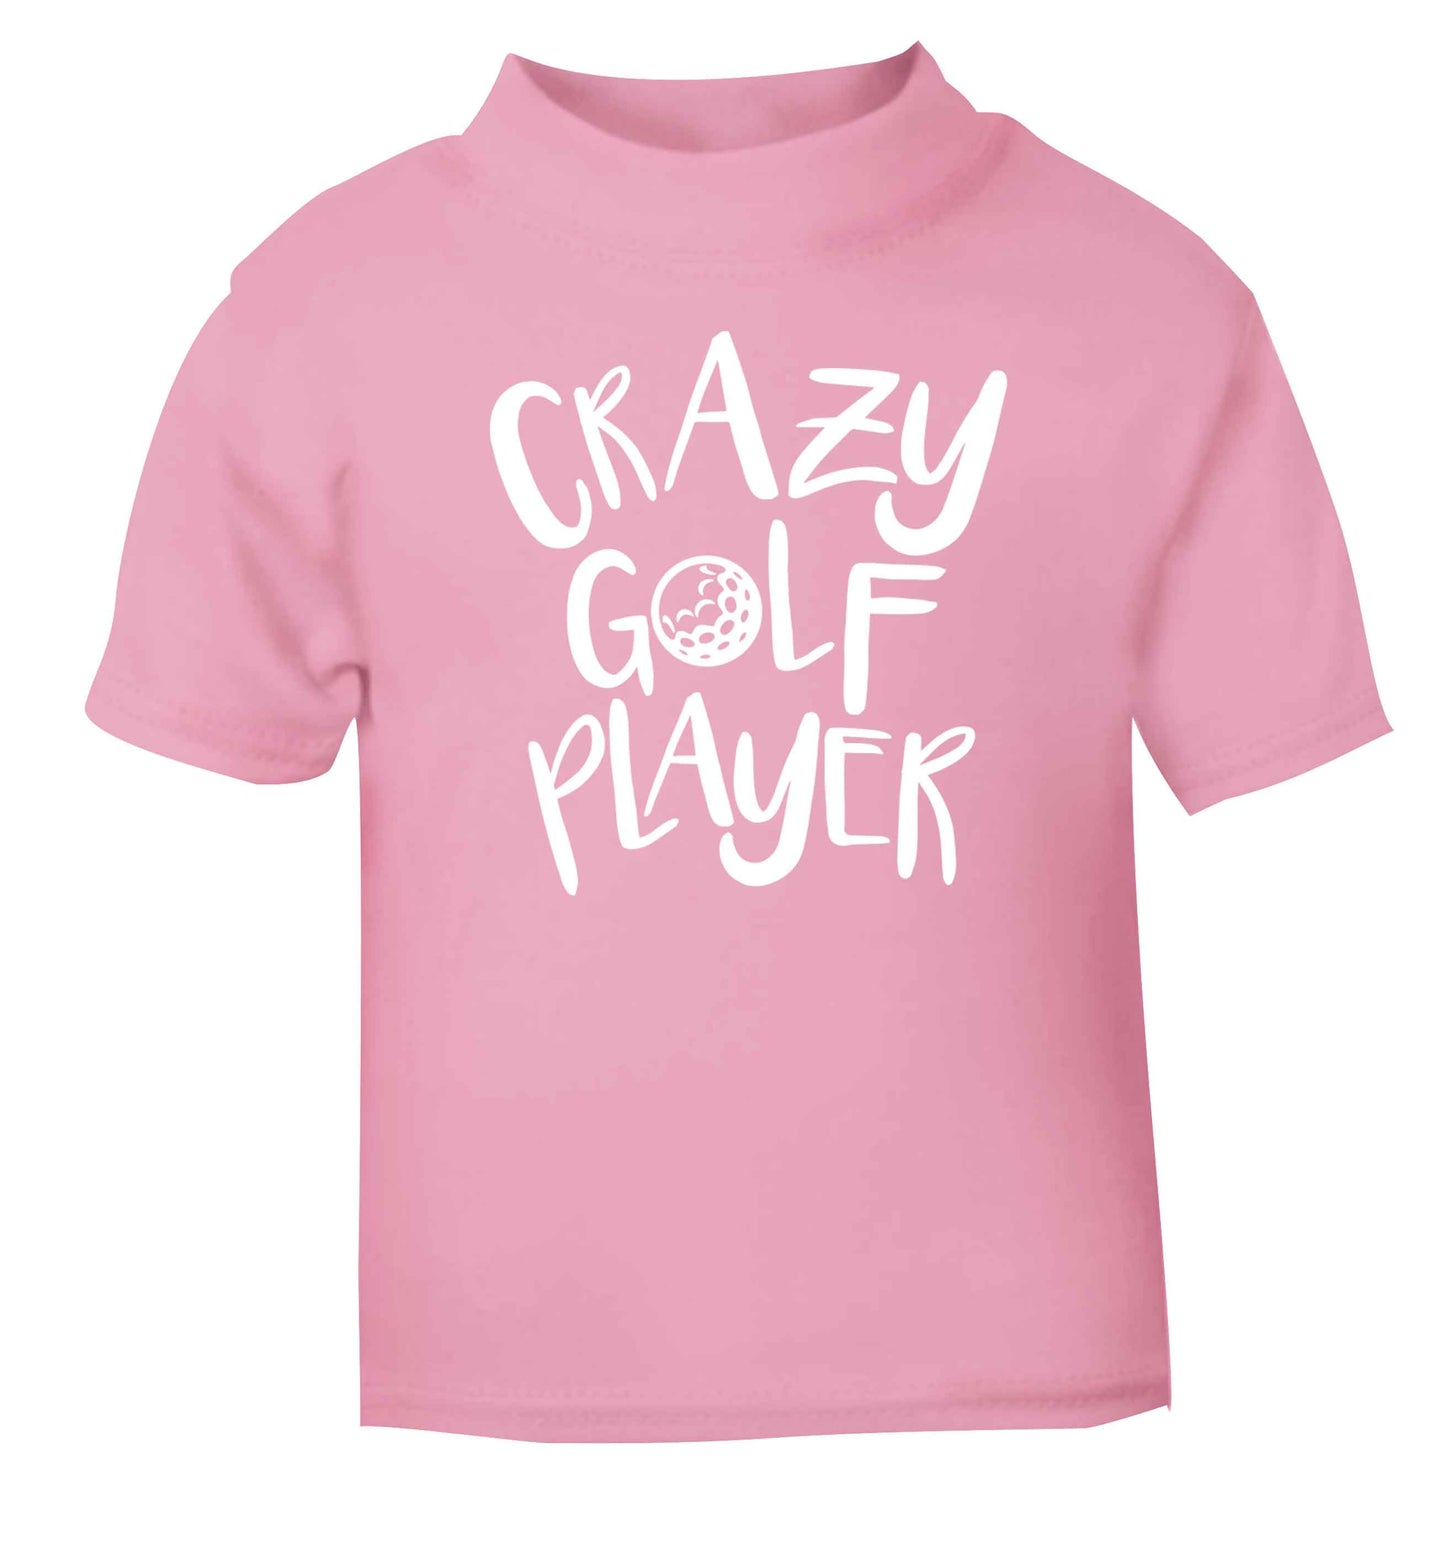 Crazy golf player light pink Baby Toddler Tshirt 2 Years